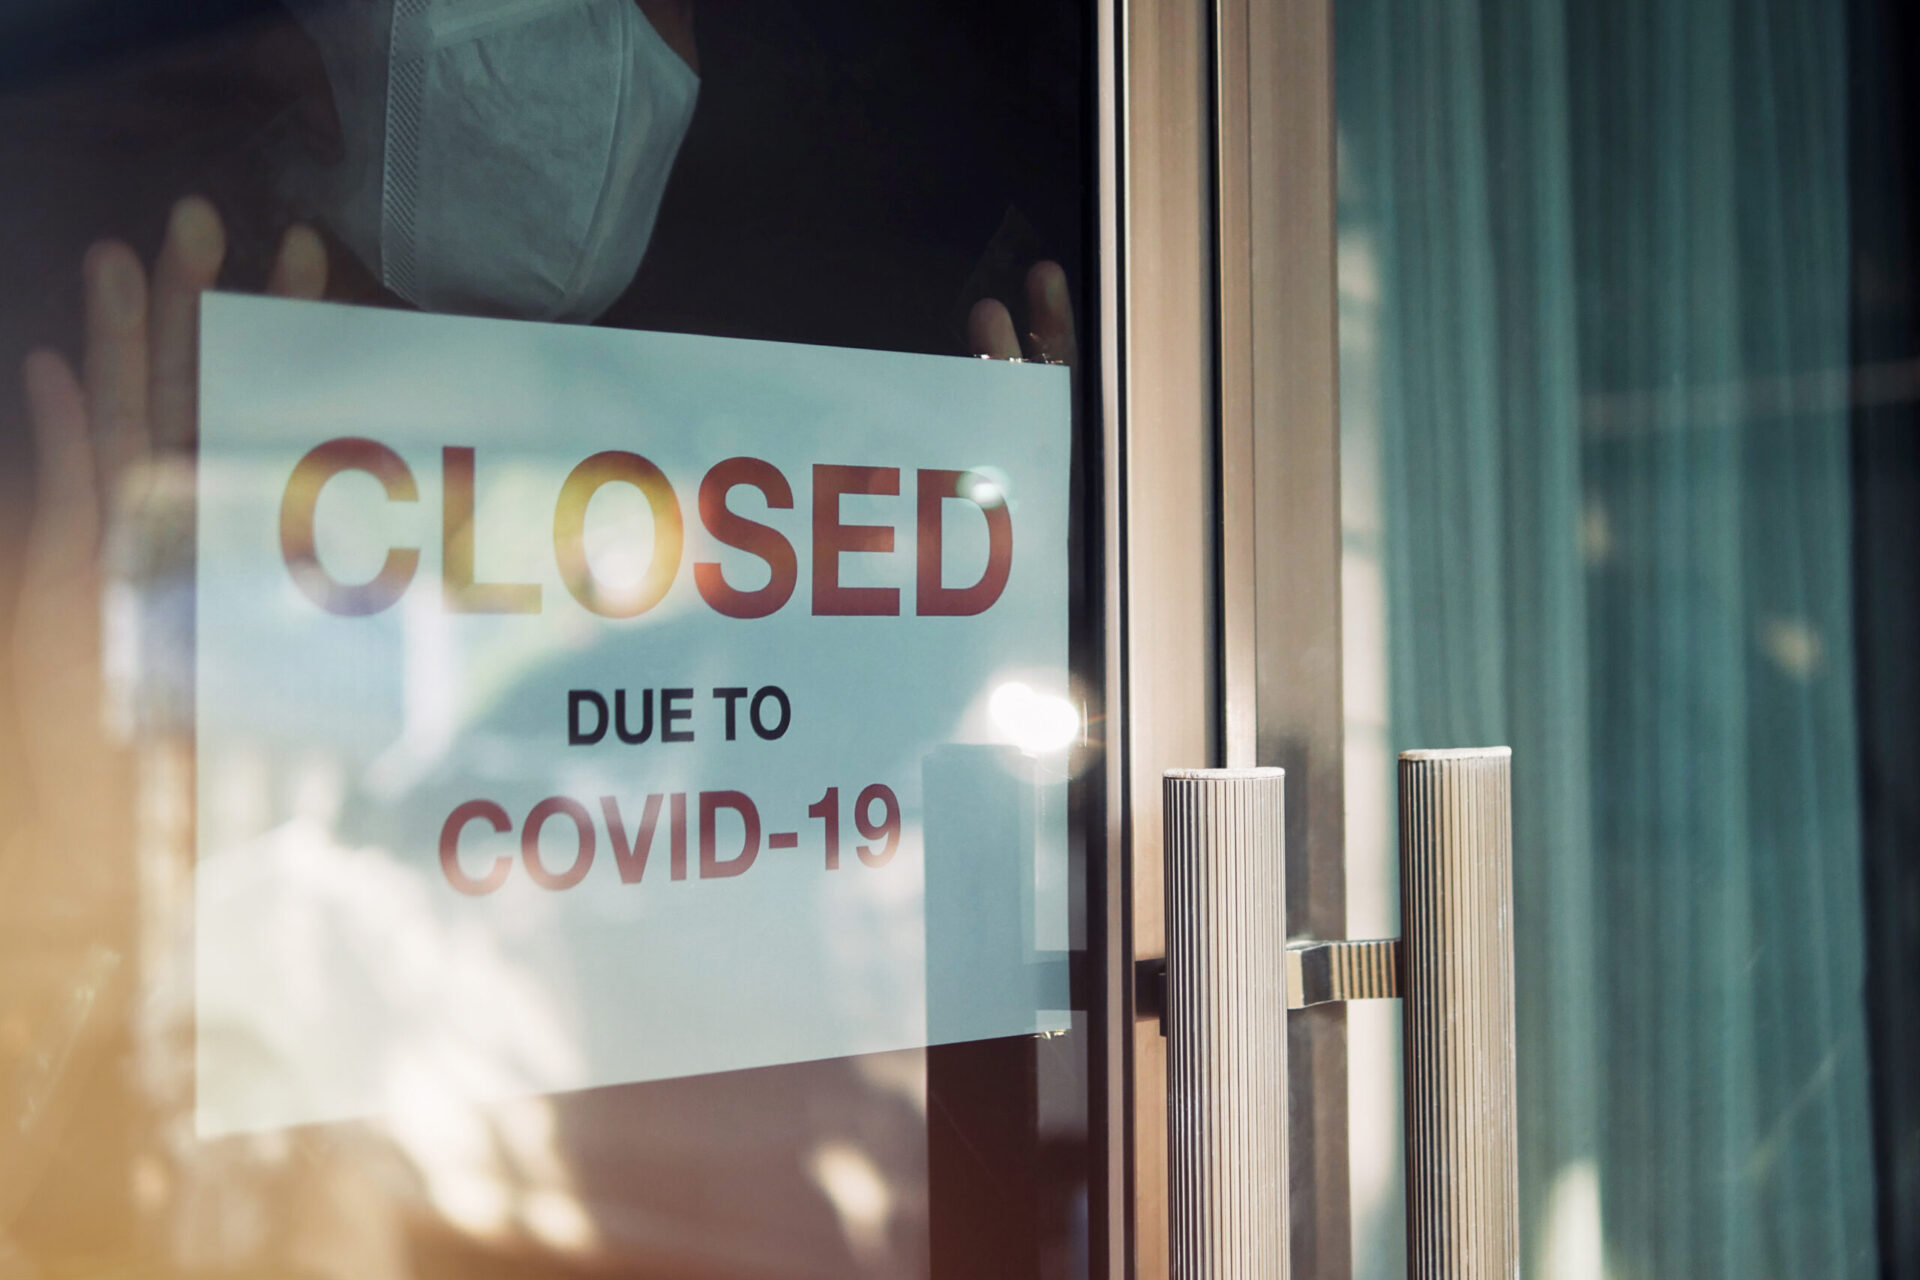 Photo of a shop sign that says 'Closed due to Covid-19'